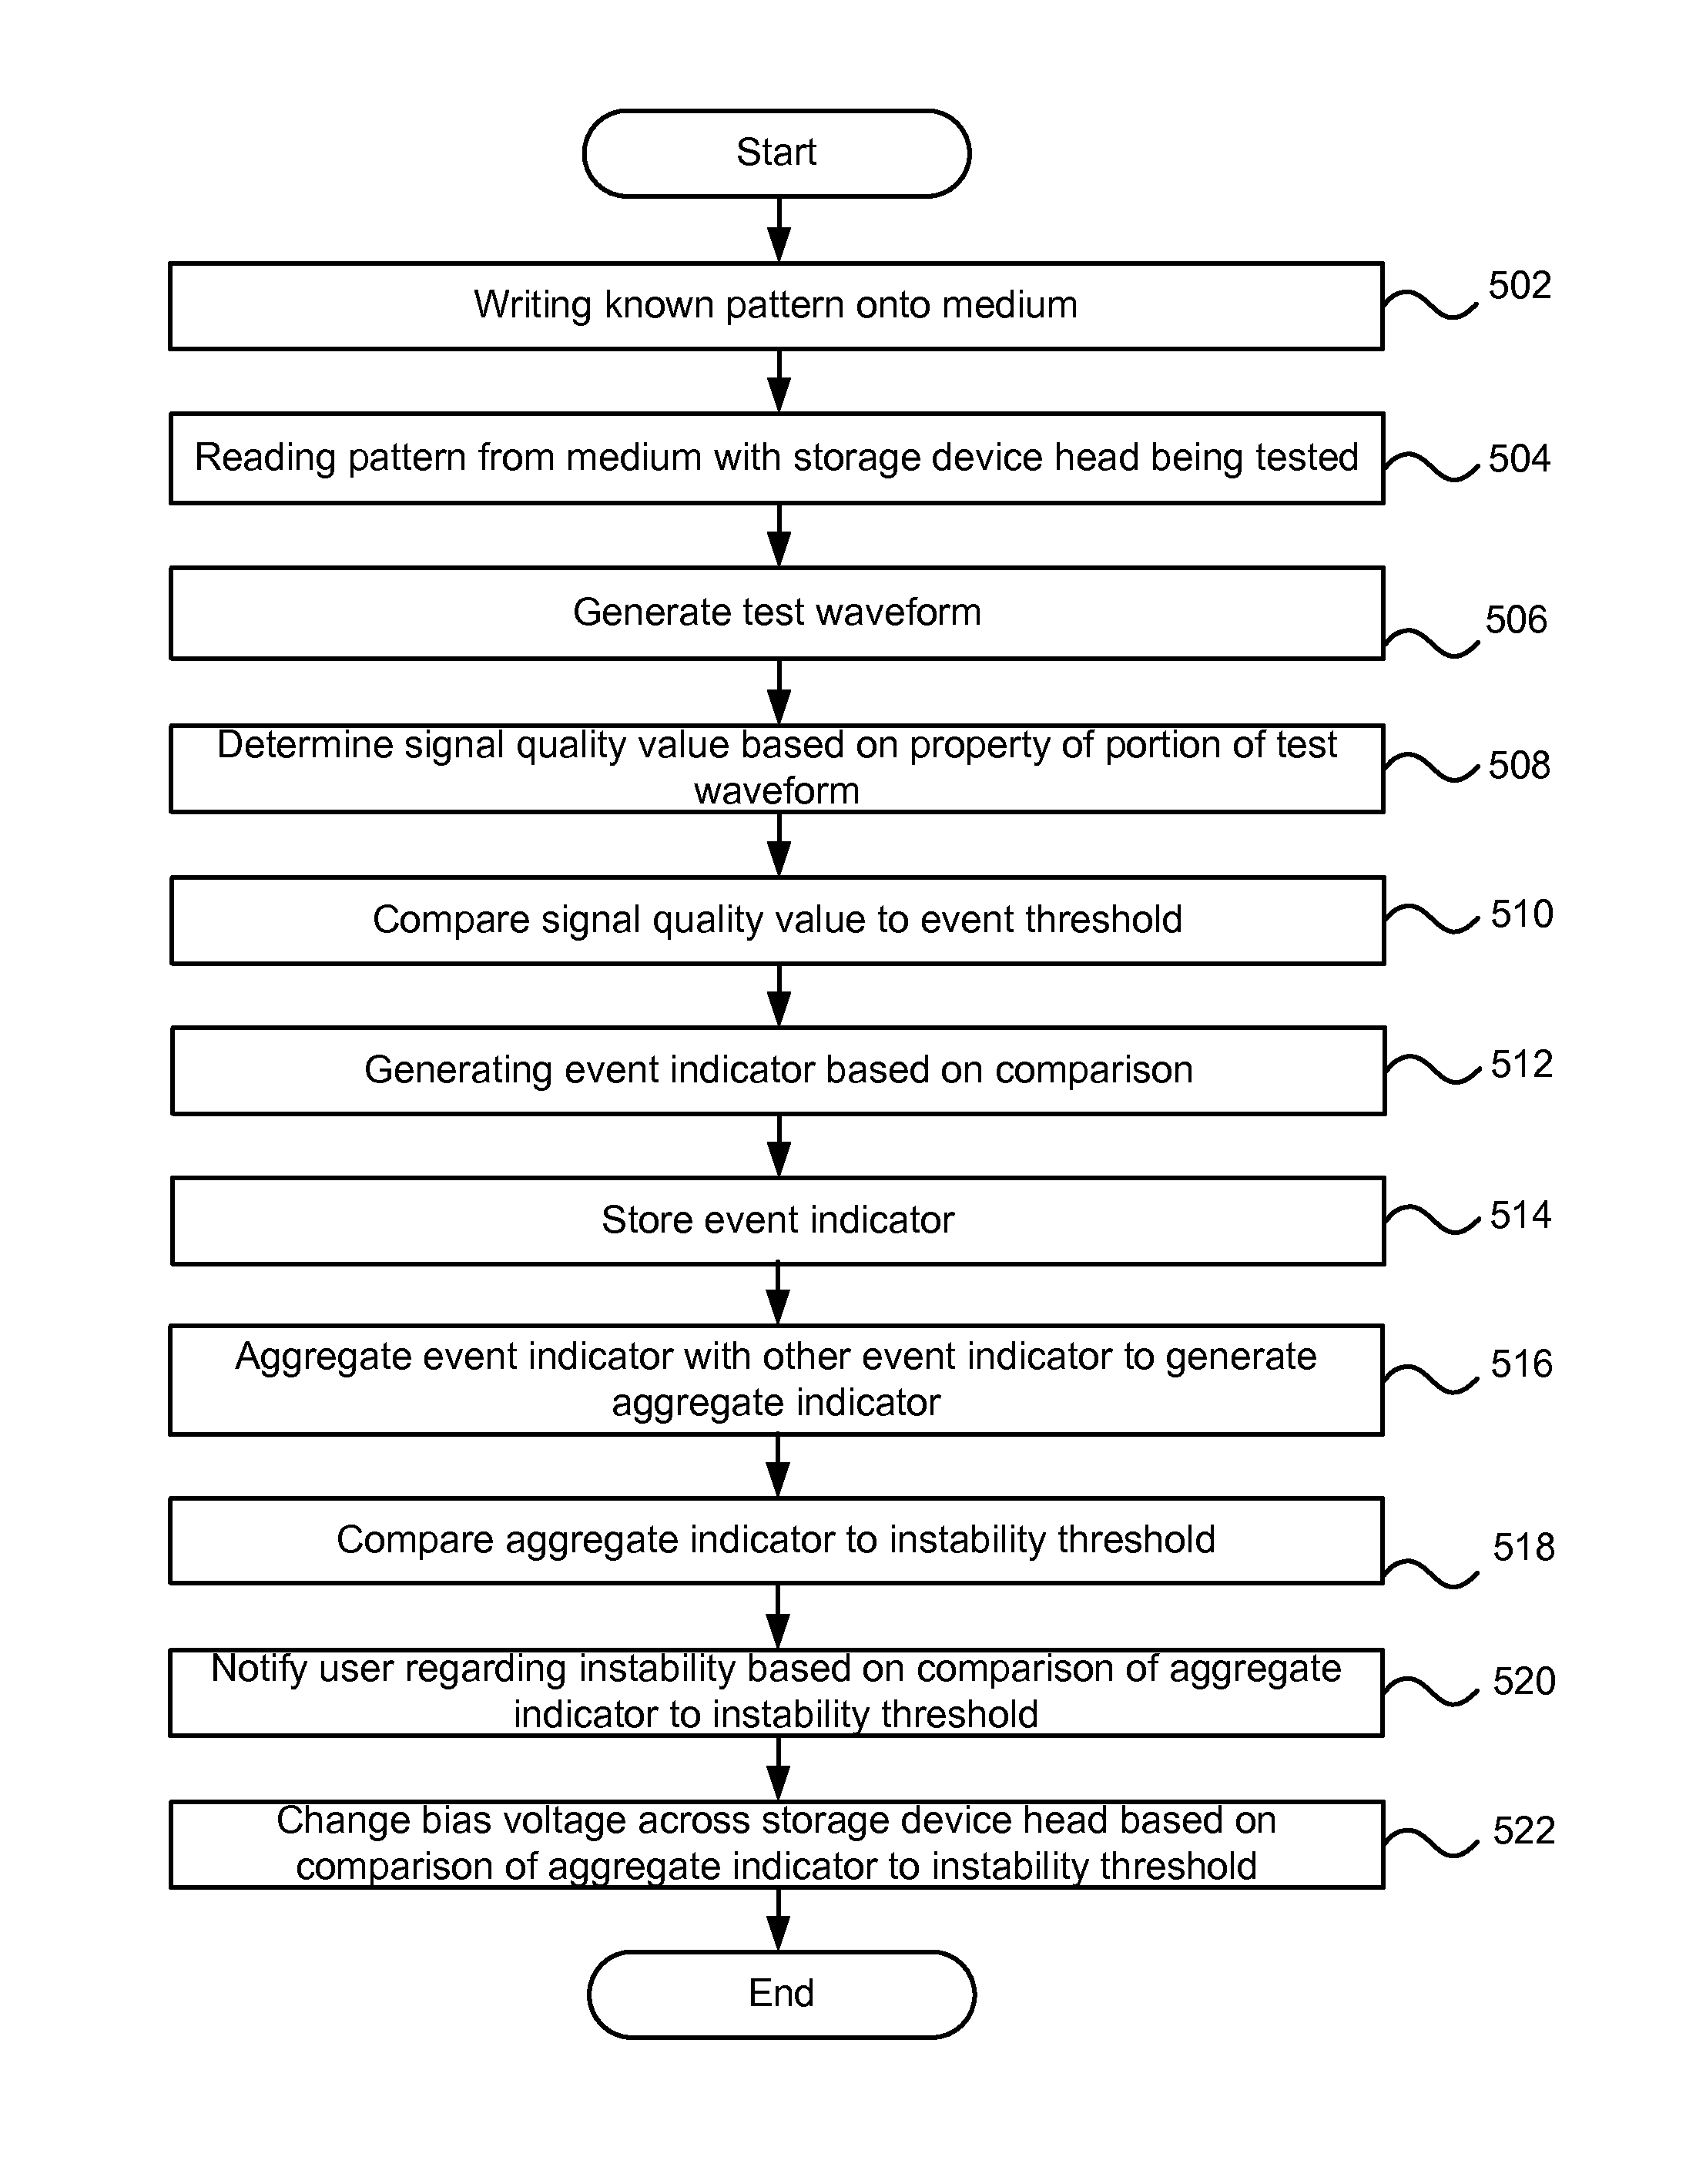 Systems and methods for storage device read/write head malfunction detection